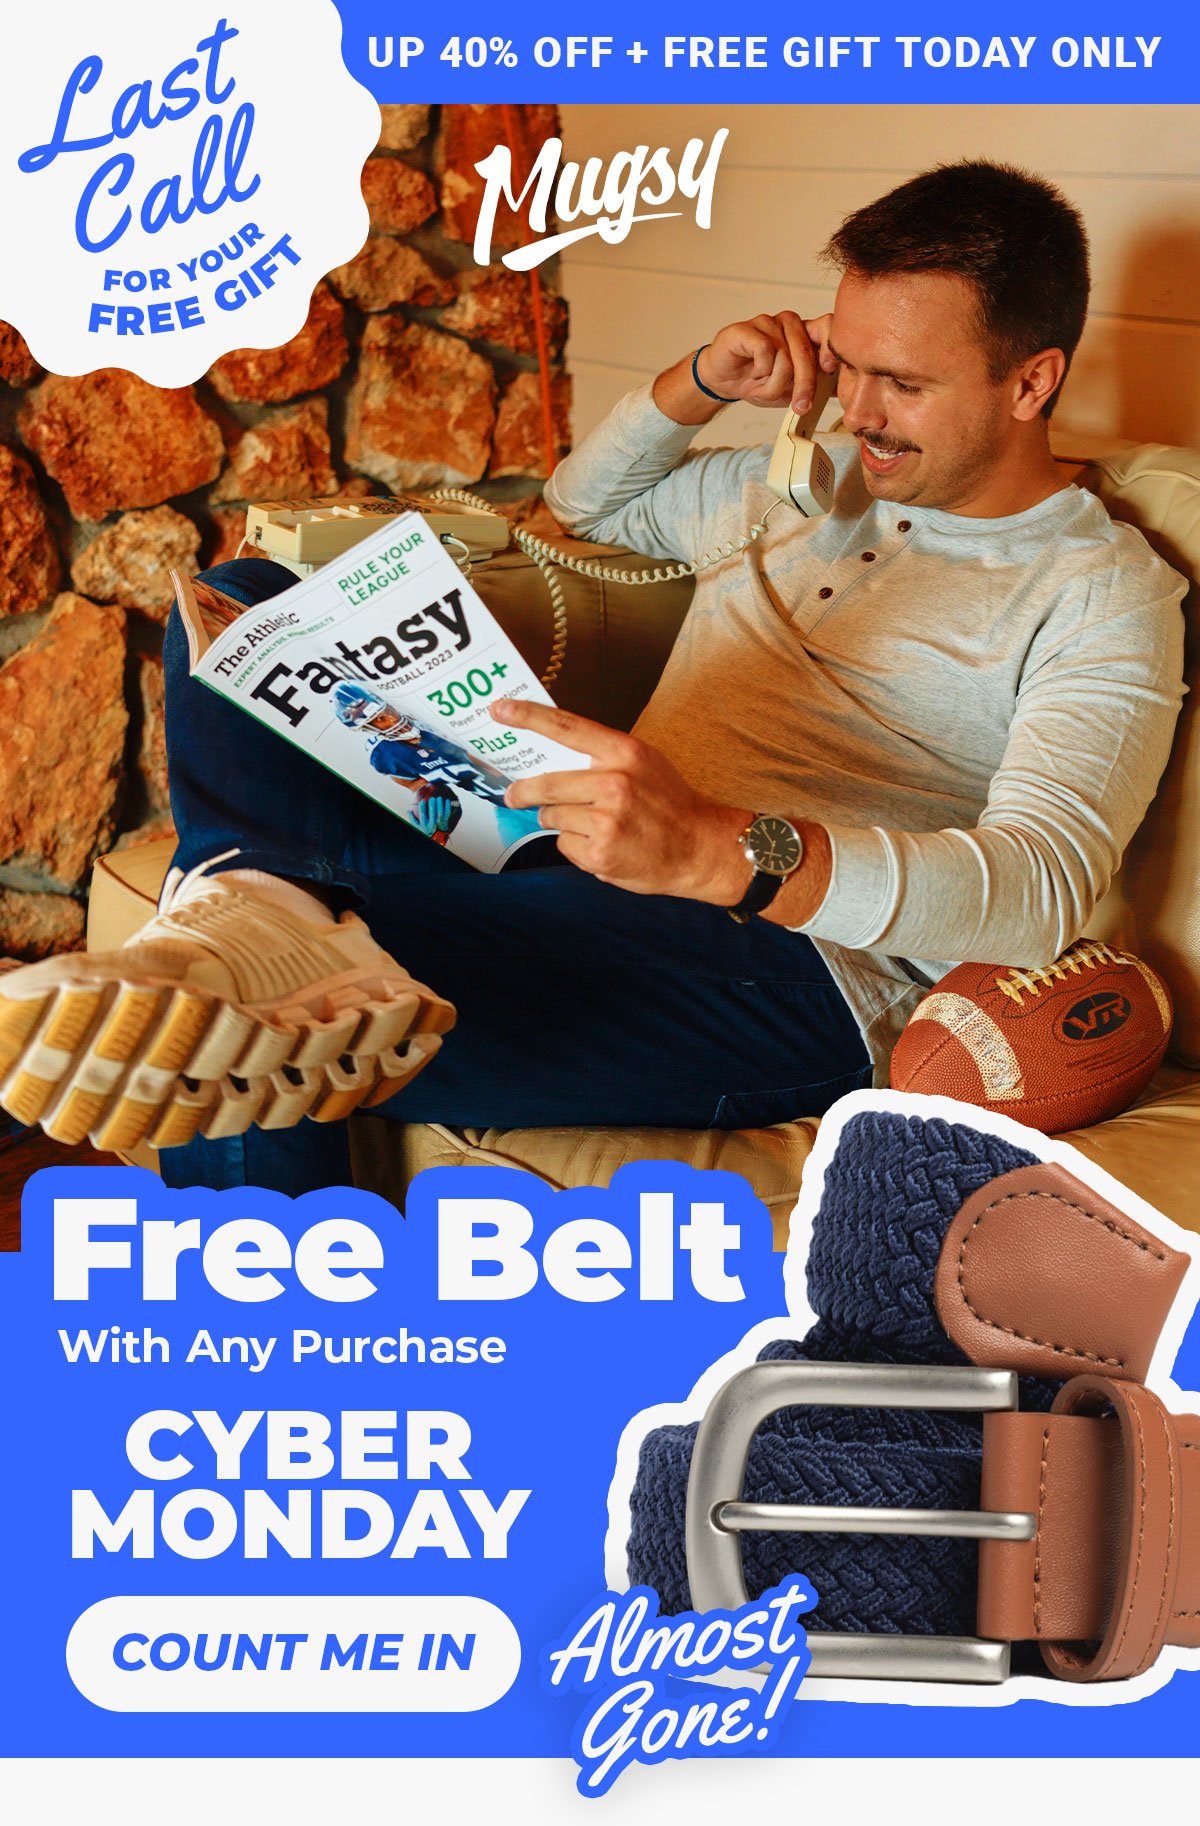 Last Call for your free gift. Up to 40% off + free gift today only. Free belt with any purchase. Almost gone! Cyber Monday. Count me in.